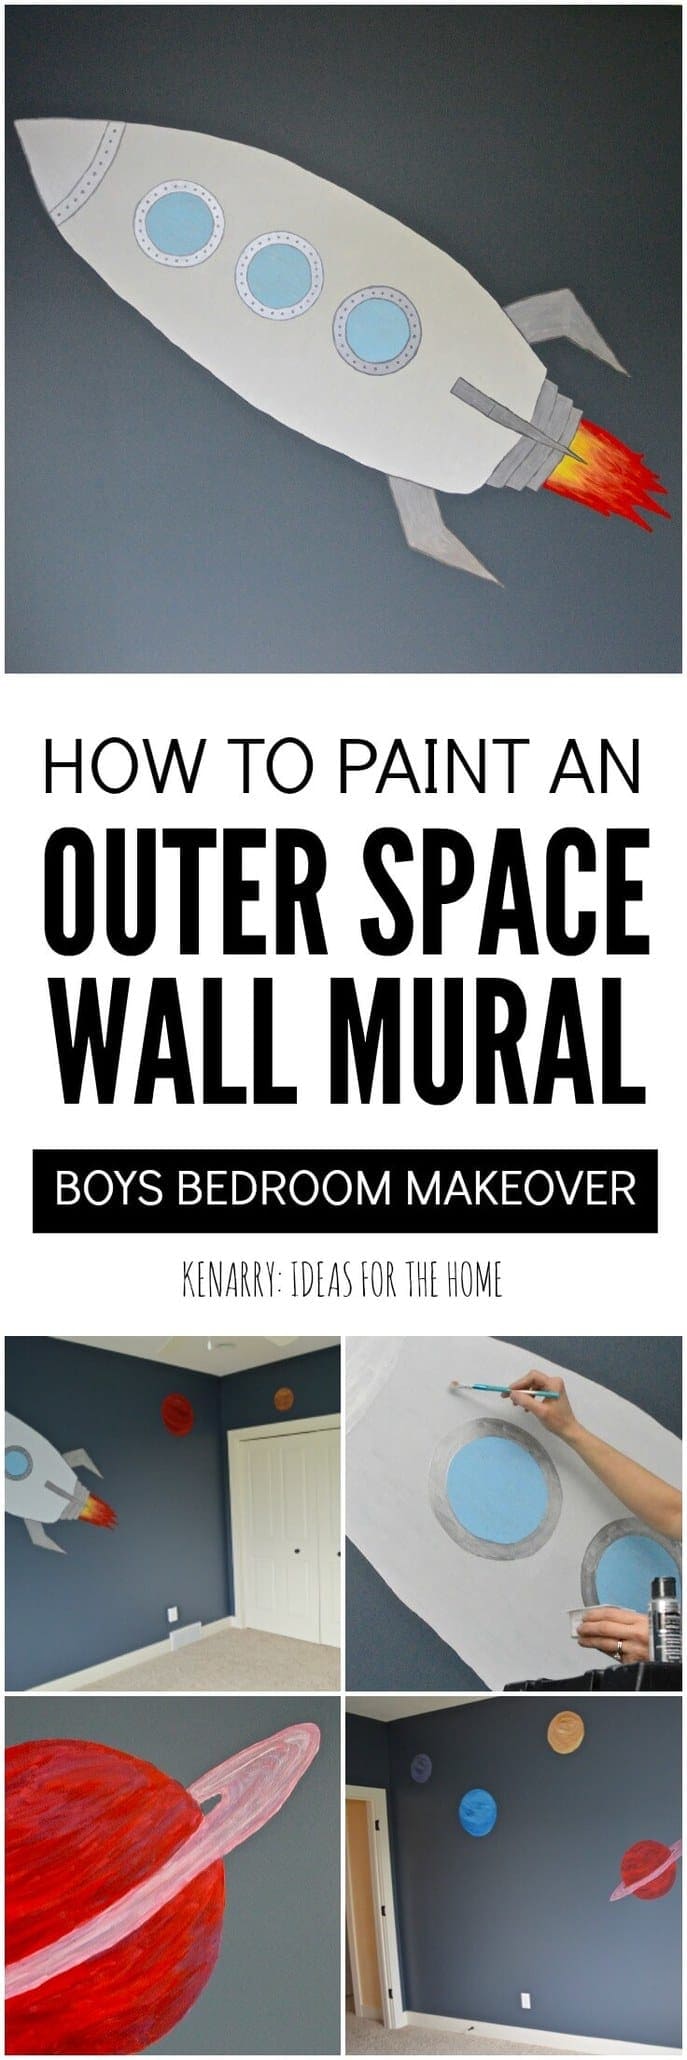 Love this idea for creating an outer space bedroom for boys! This tutorial makes it look easy to paint an outer space mural to decorate walls in your home.